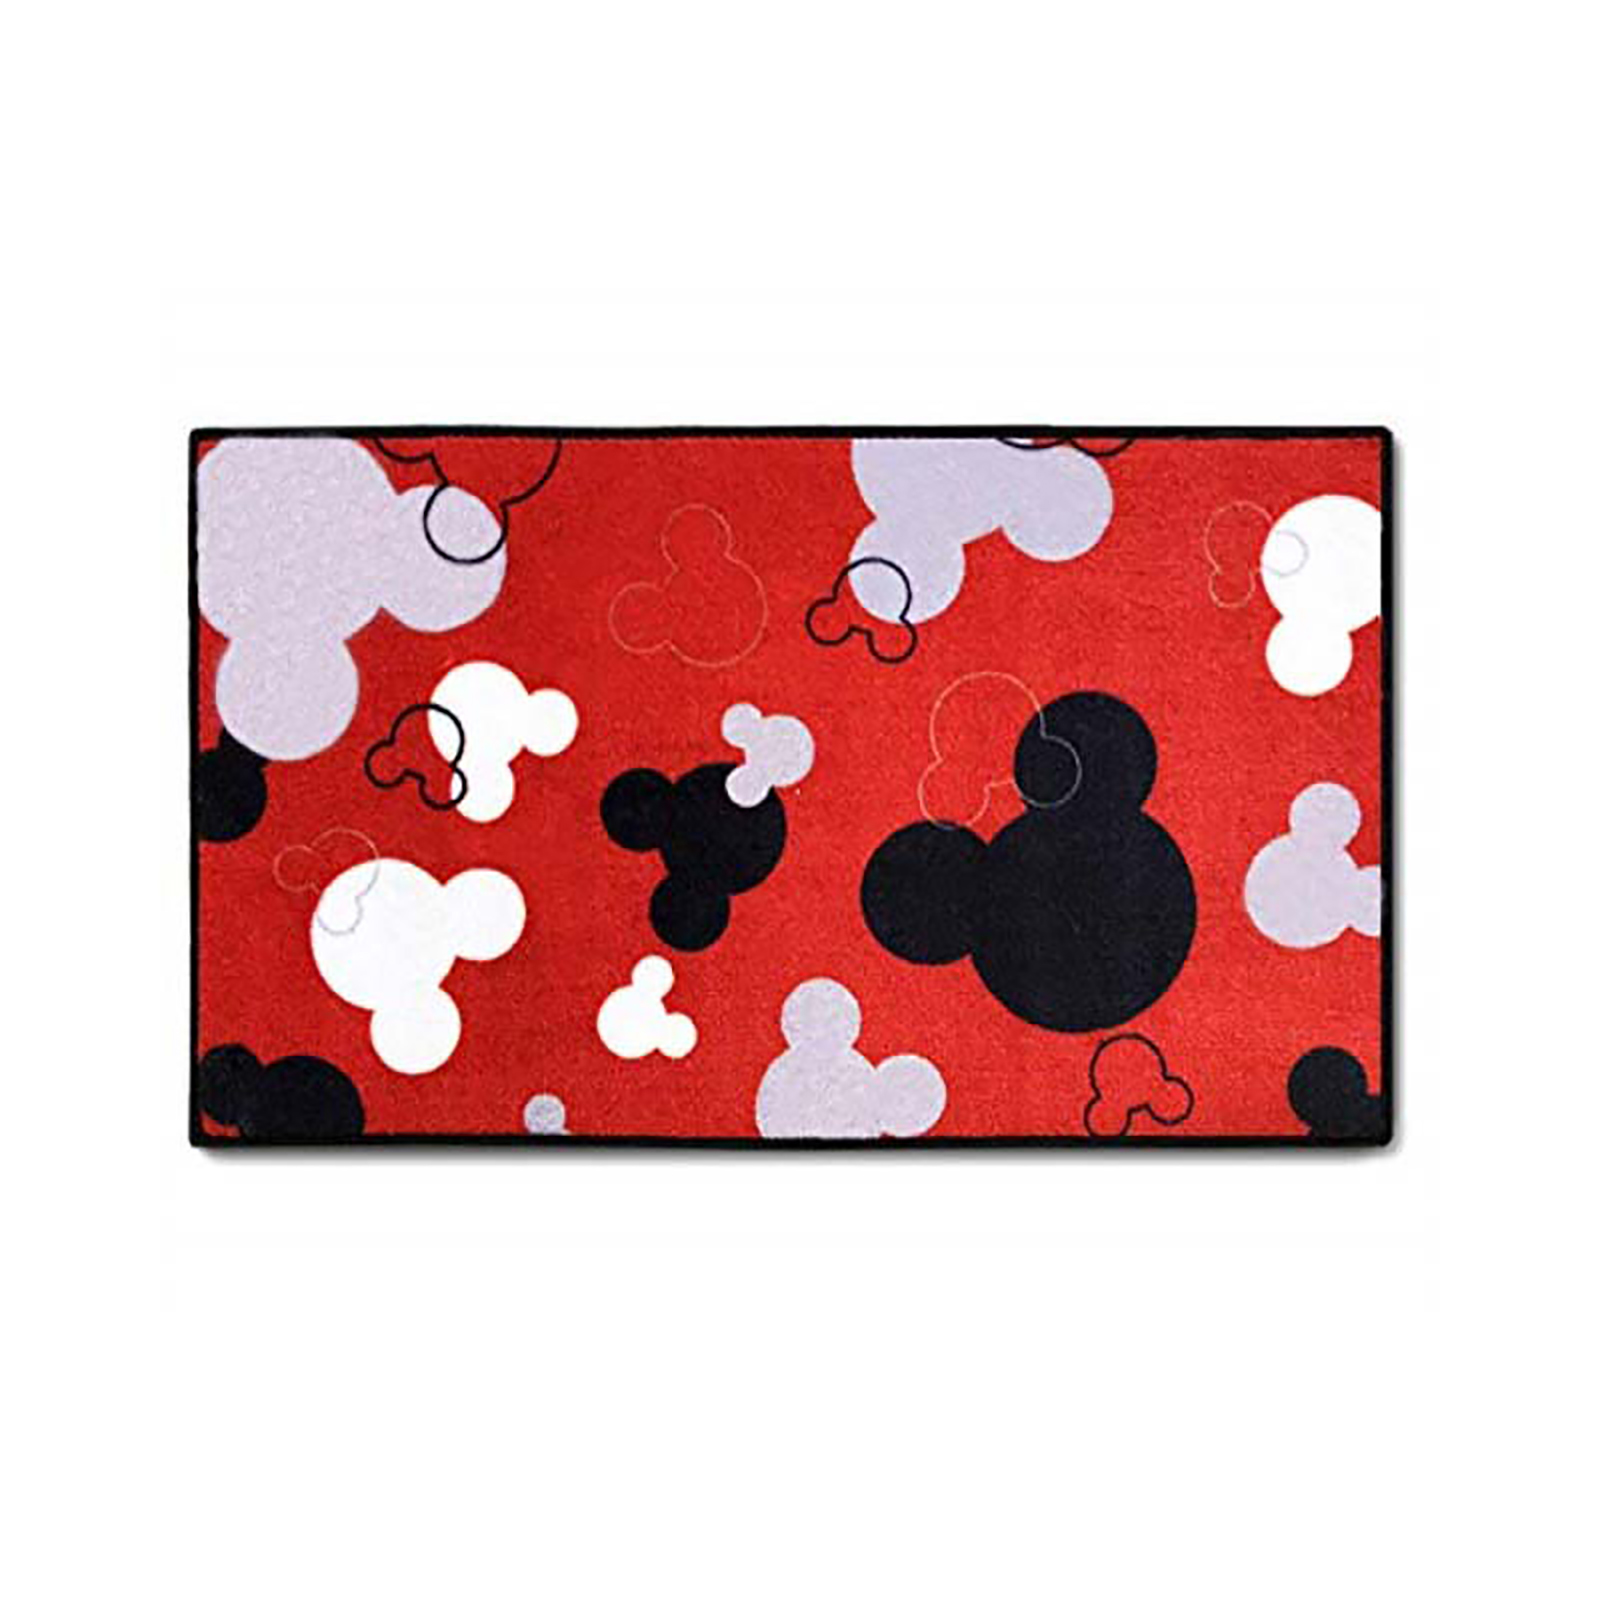 J.Ehonace 17" x 30" Mickey Mouse Indoor Mat - Red